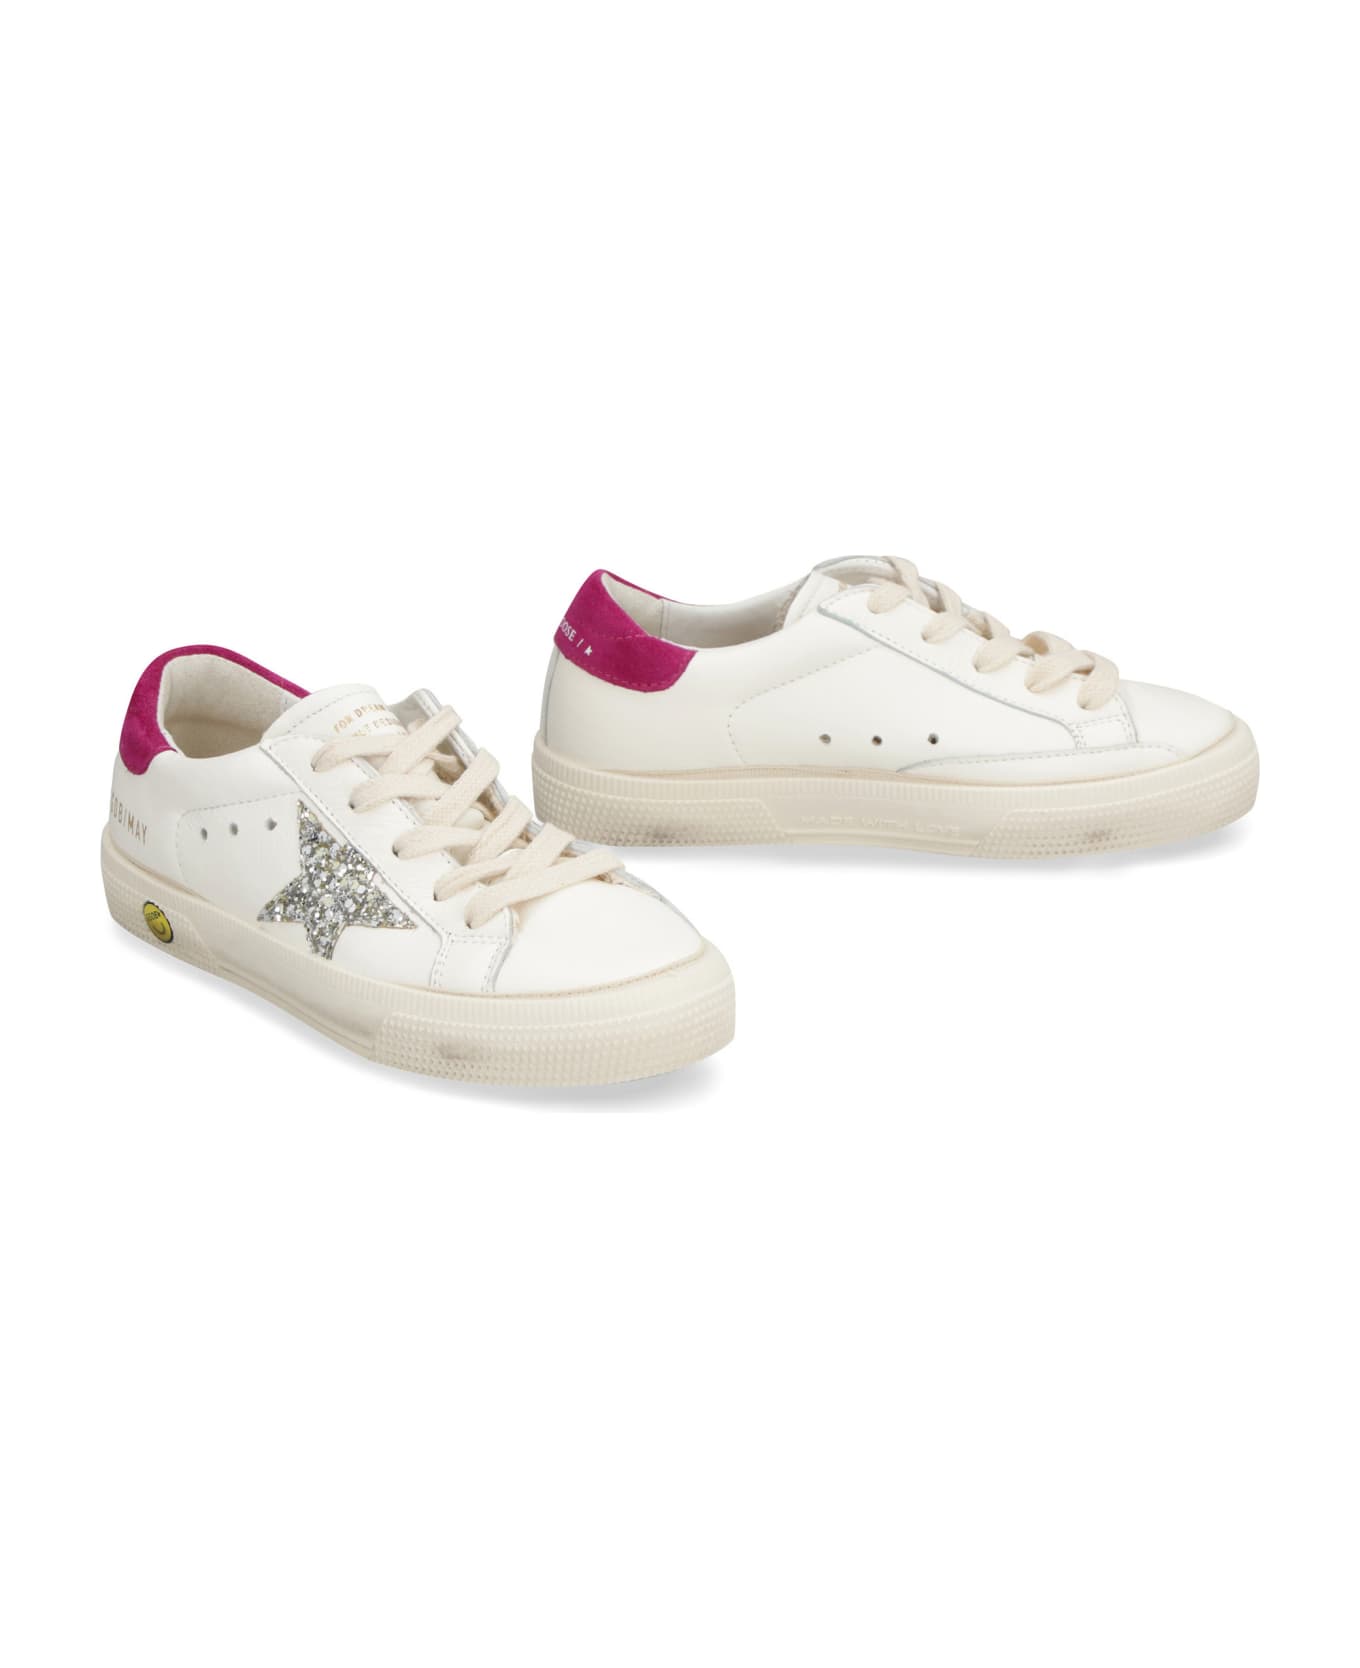 Golden Goose May Leather Sneakers - White